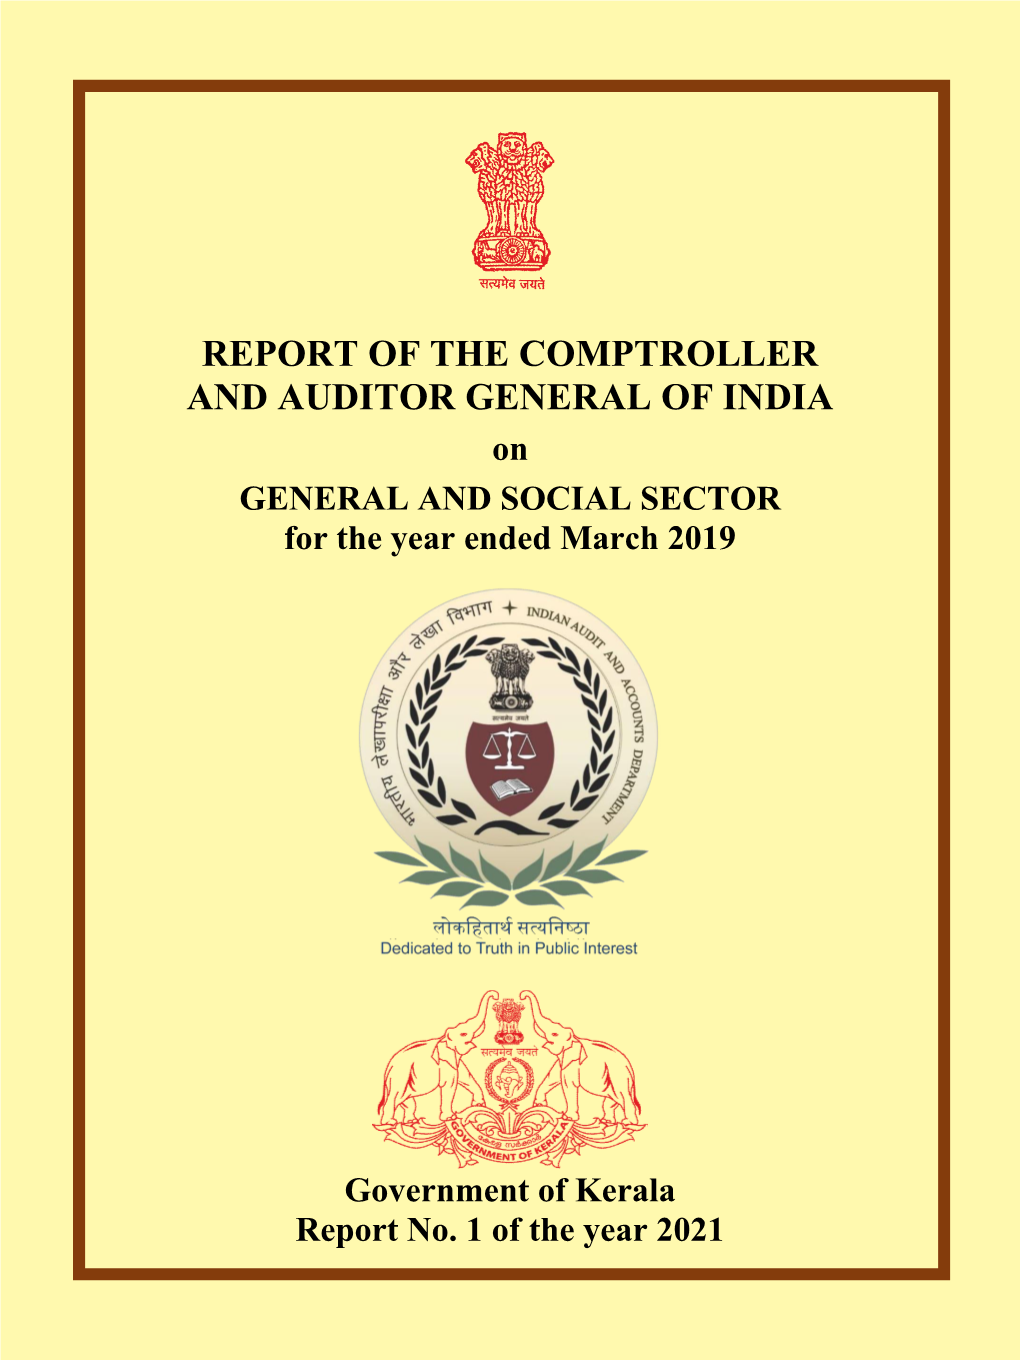 REPORT of the COMPTROLLER and AUDITOR GENERAL of INDIA on GENERAL and SOCIAL SECTOR for the Year Ended March 2019